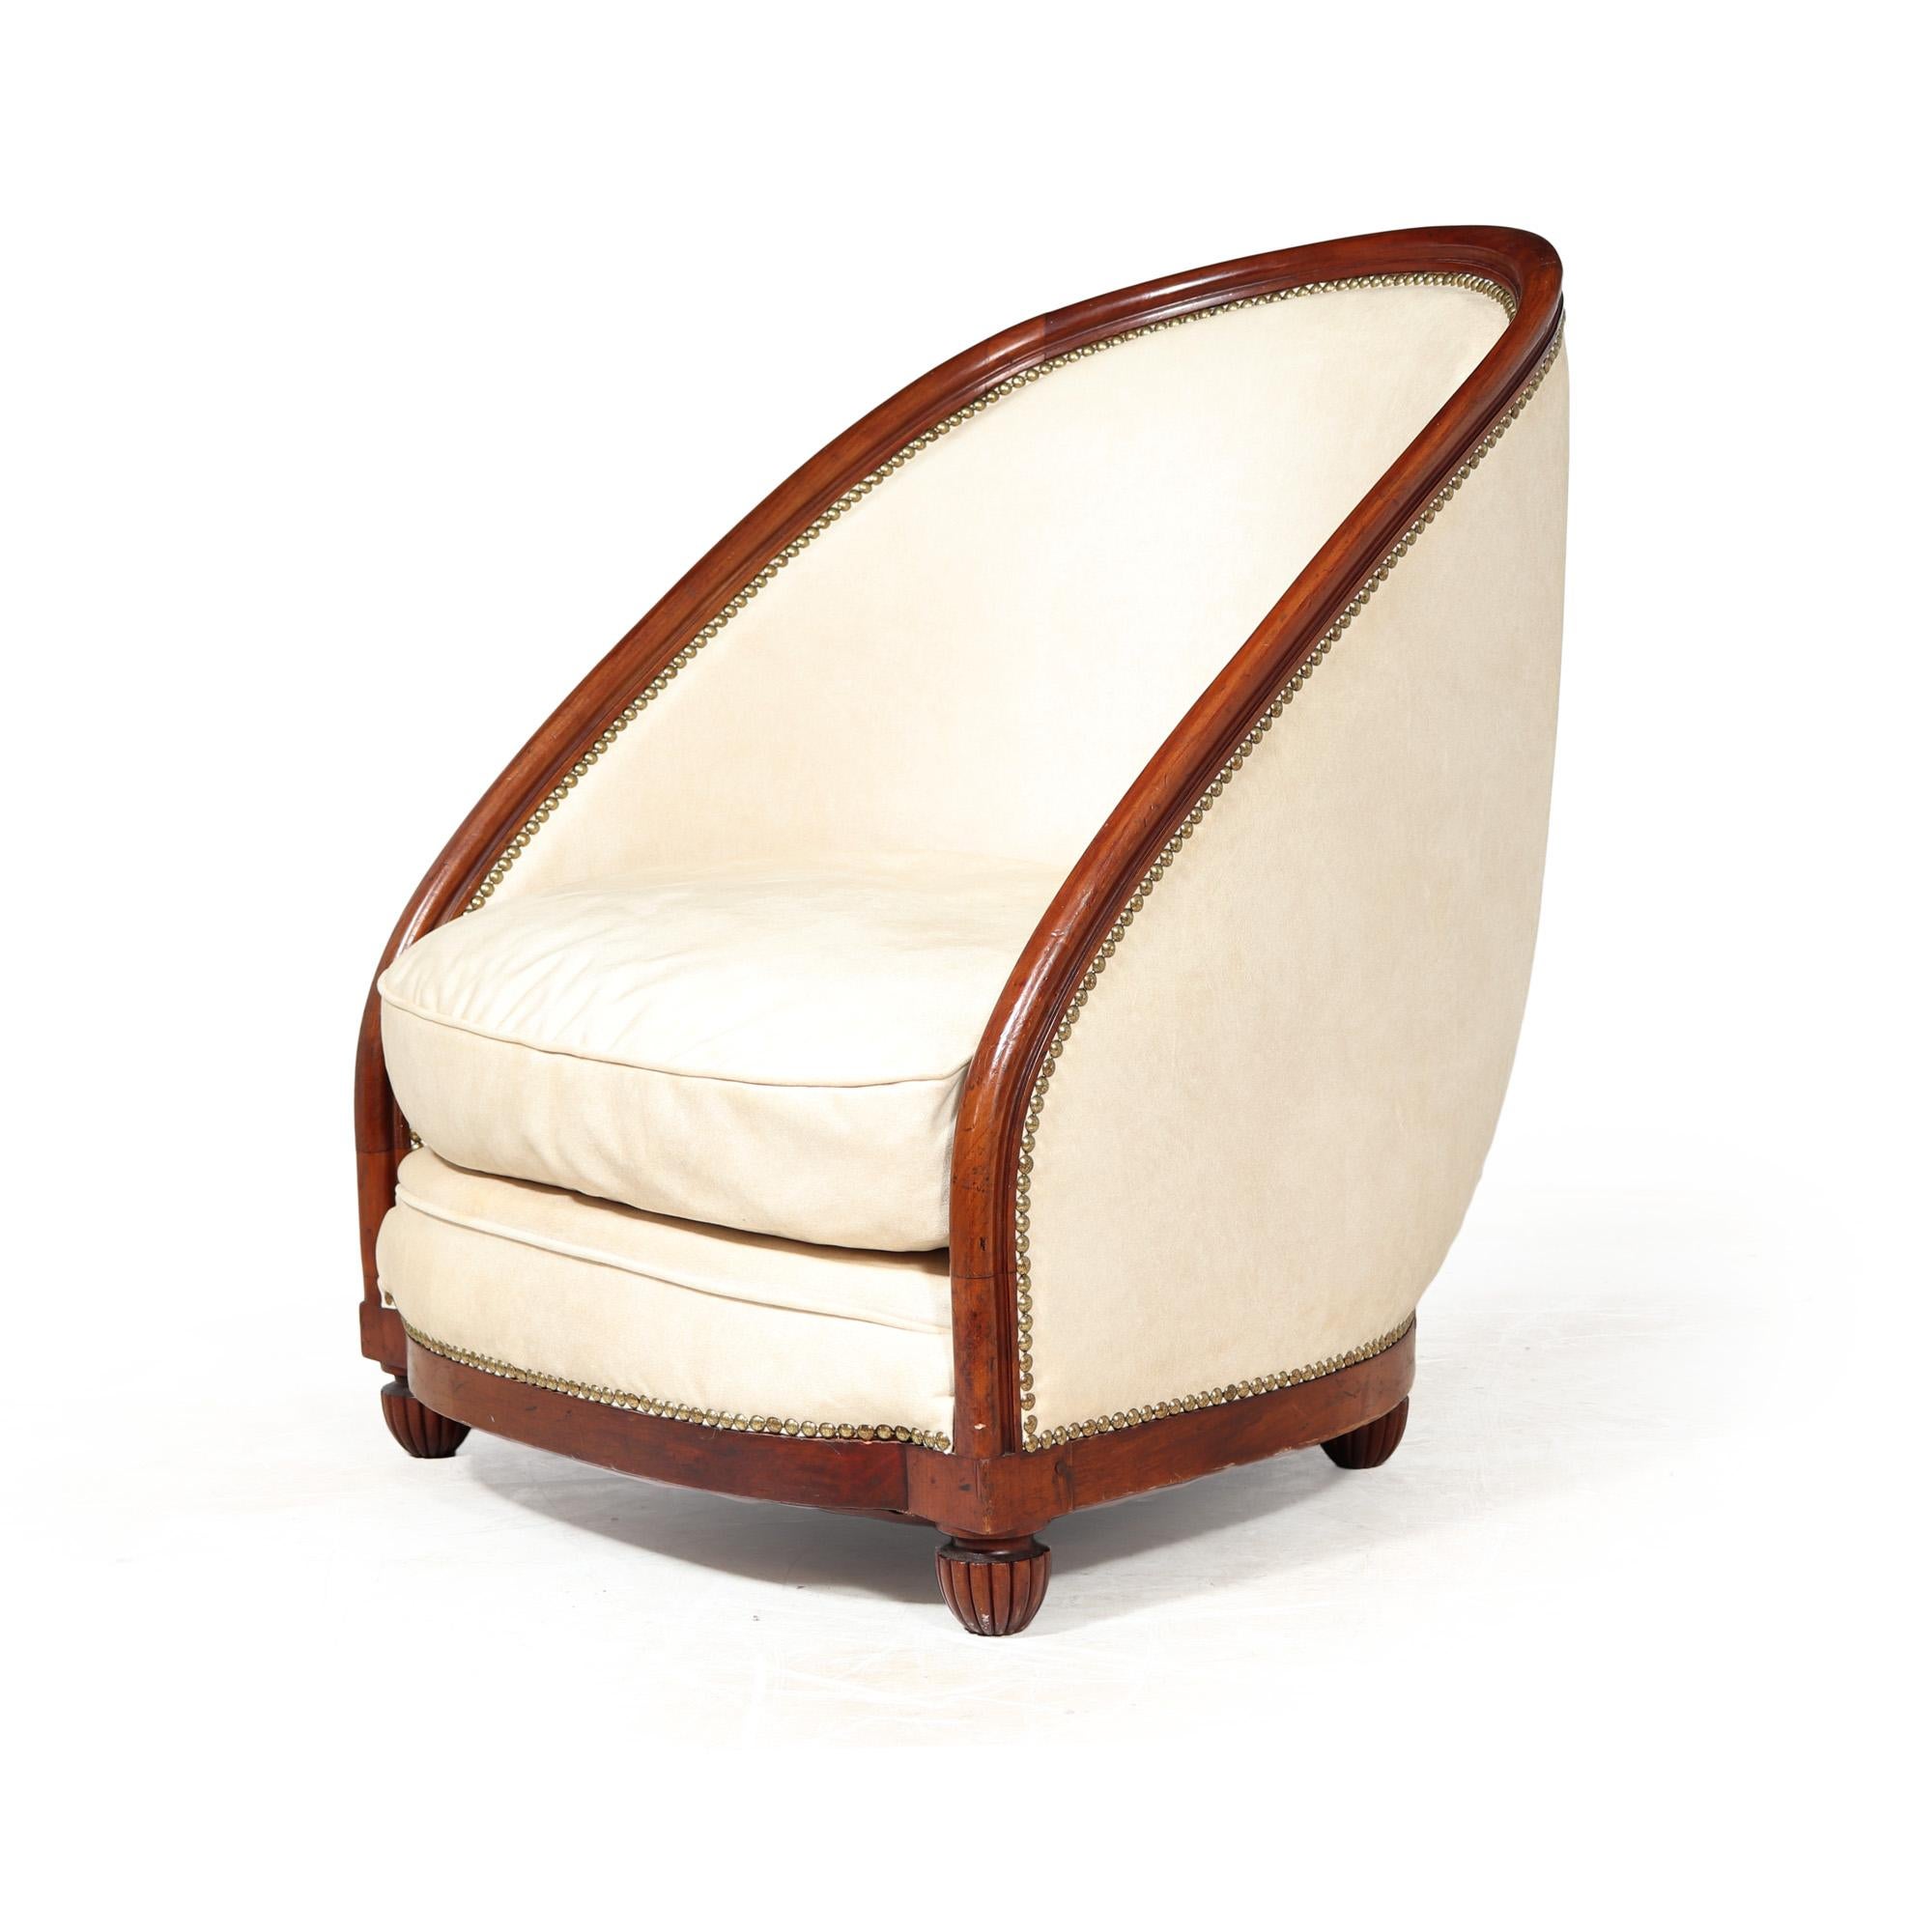 FRENCH ART DECO SLIPPER ARMCHAIR 
Introducing an exquisite Art Deco style slipper chair that exudes elegance and sophistication! This stunning piece is a perfect addition to any modern living space, providing both comfort and style. Crafted with a